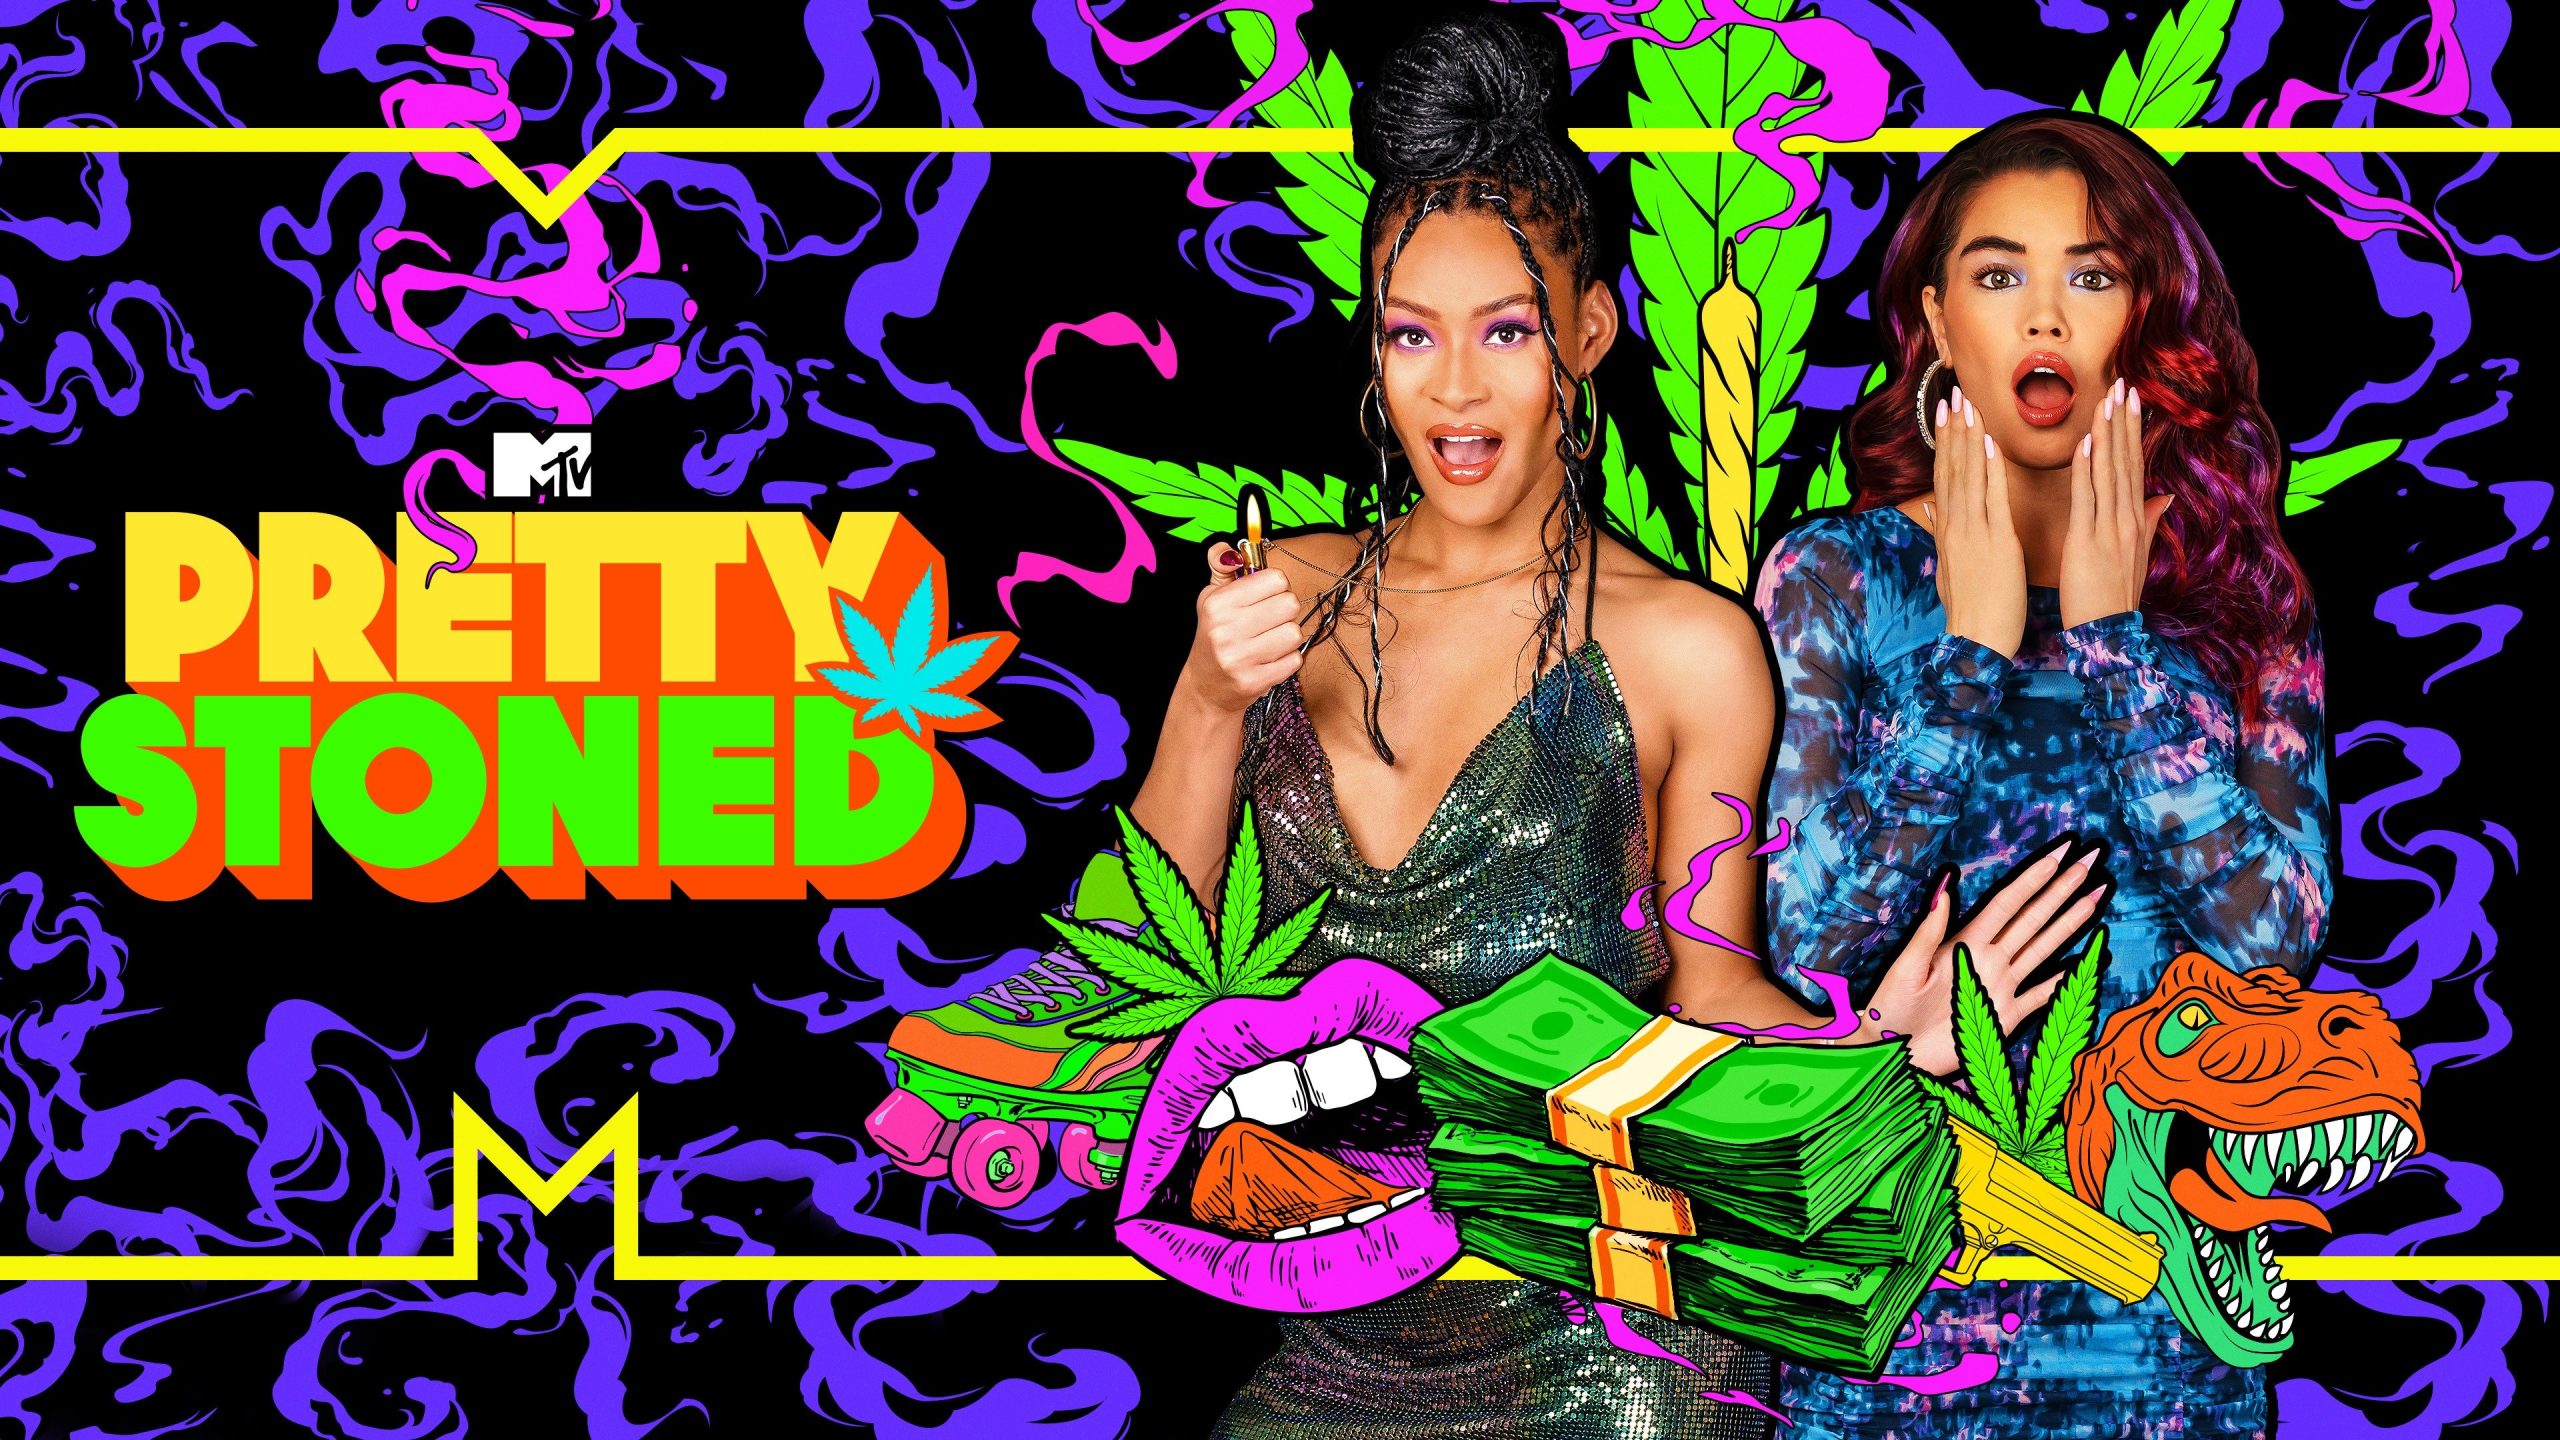 MTV’s “Pretty Stoned” is Absolutely Hilarious & A Must See!